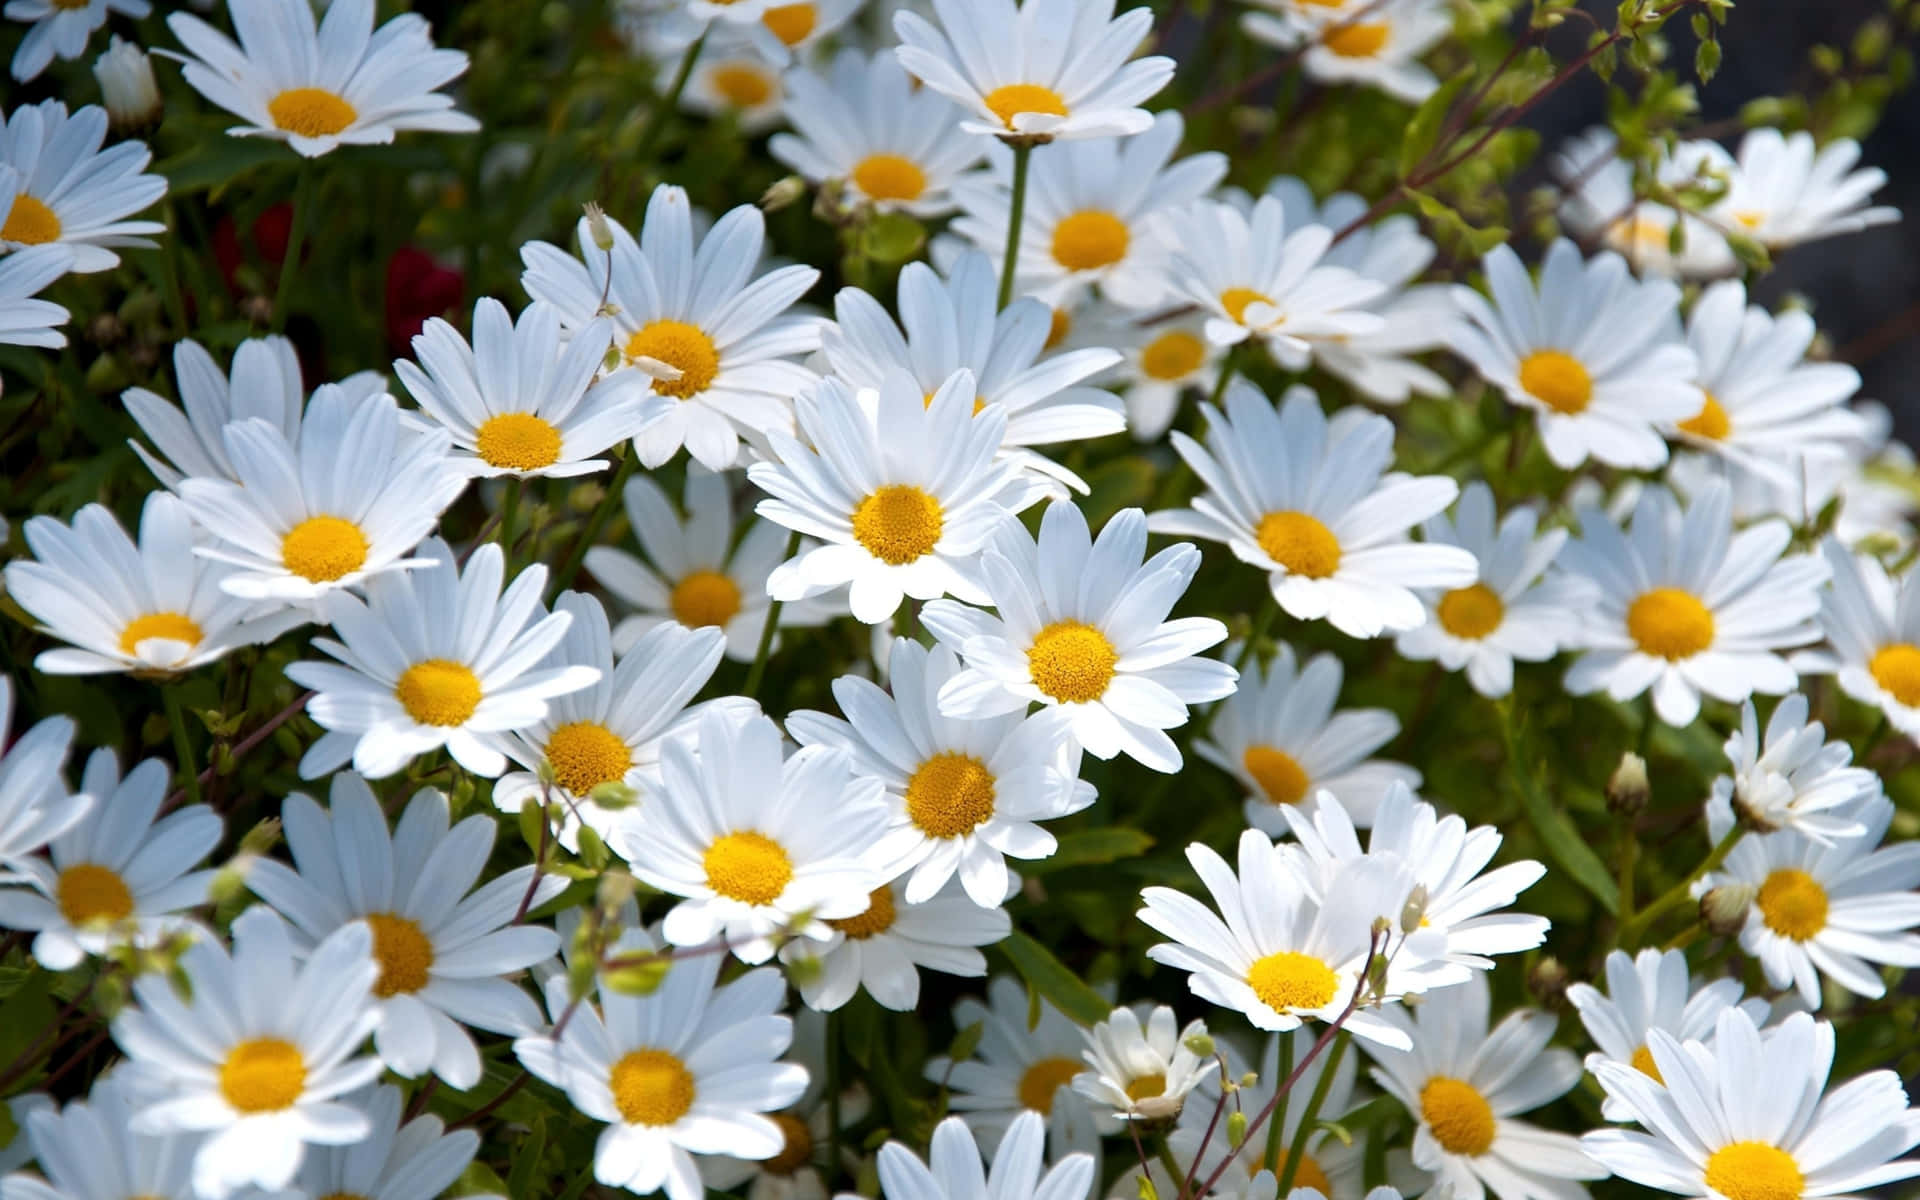 Daisies are a source of beauty in nature